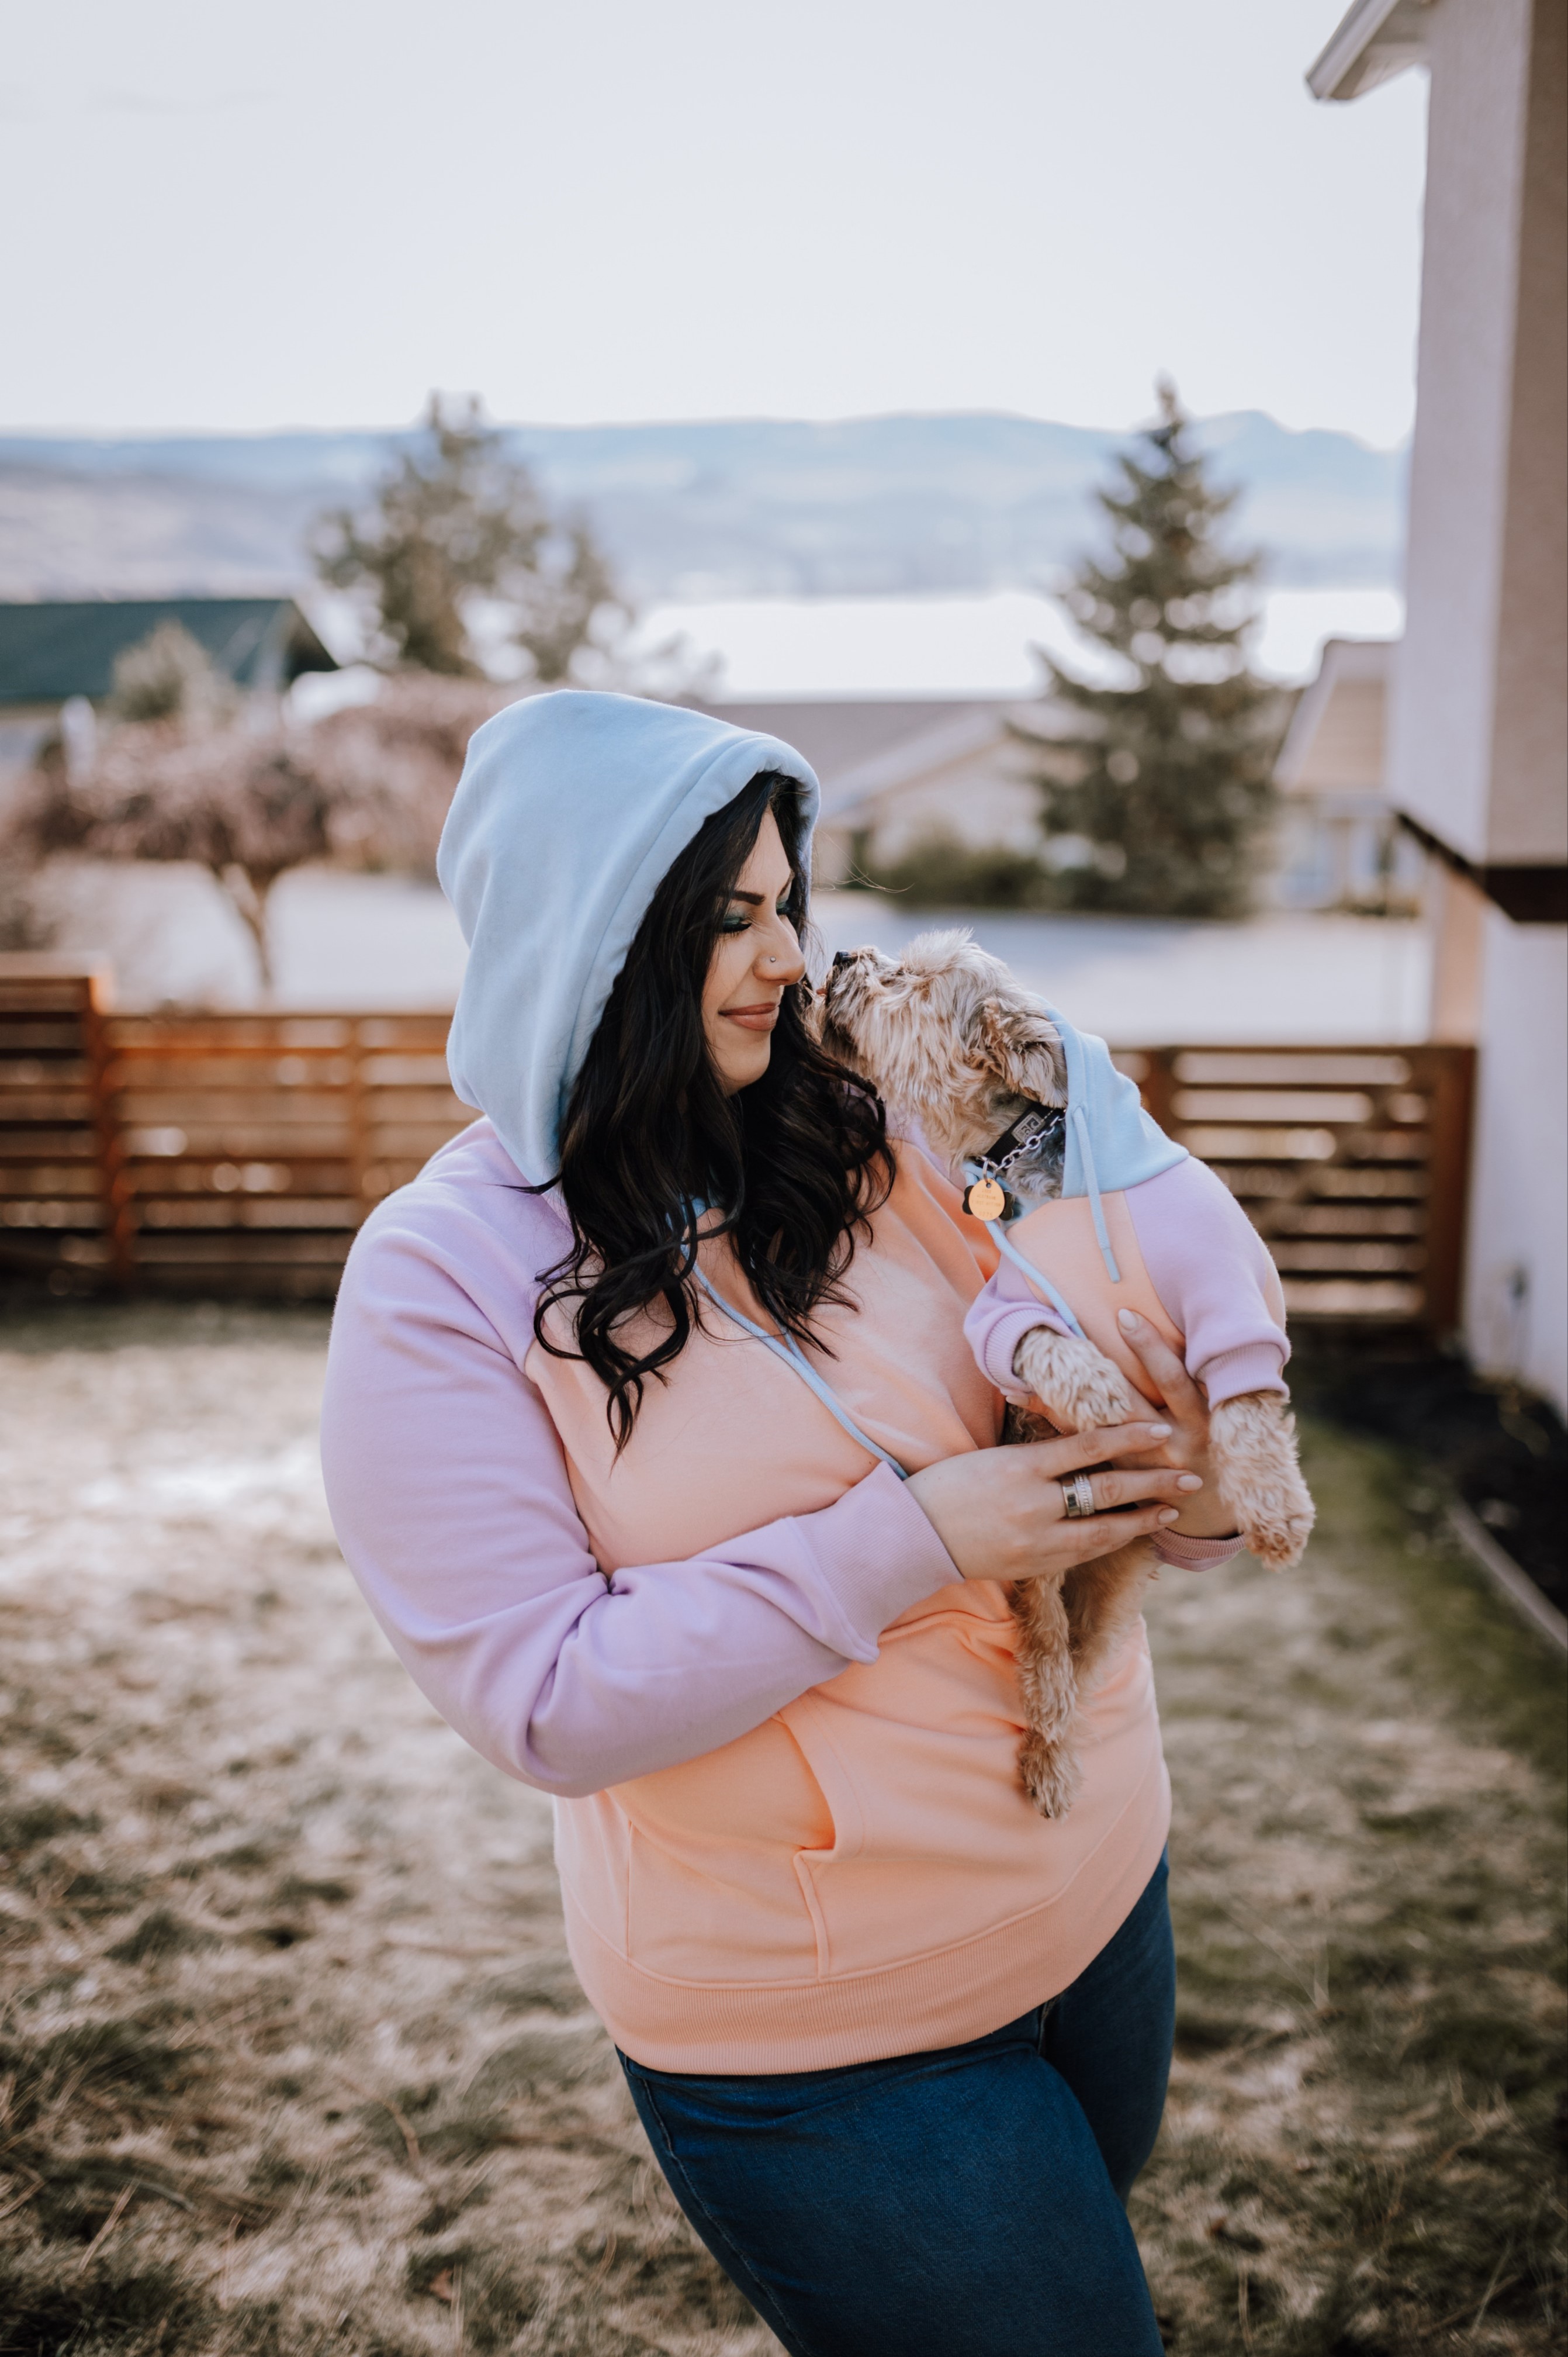 Woman holding a small dog that is kissing her face, both are wearing matching sweatshirts.